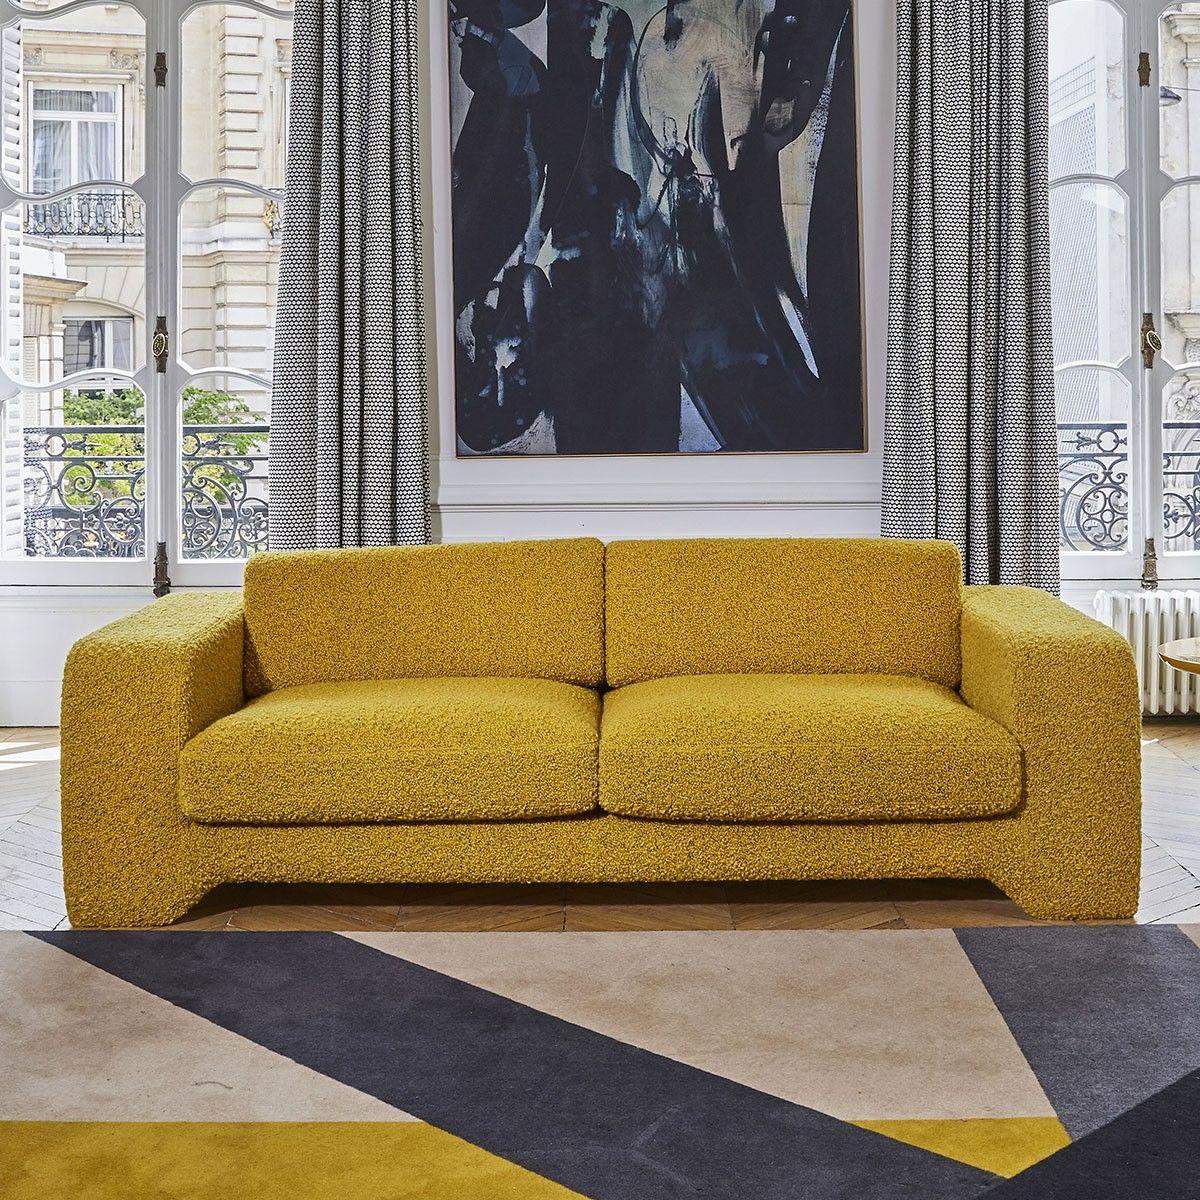 Popus Editions Giovanna 3 Seater Sofa in Green (772256) Como Velvet Upholstery.

Giovanna is a sofa with a strong profile. A sober, plush line, with this famous detail that changes everything, so as not to forget its strength of character and this